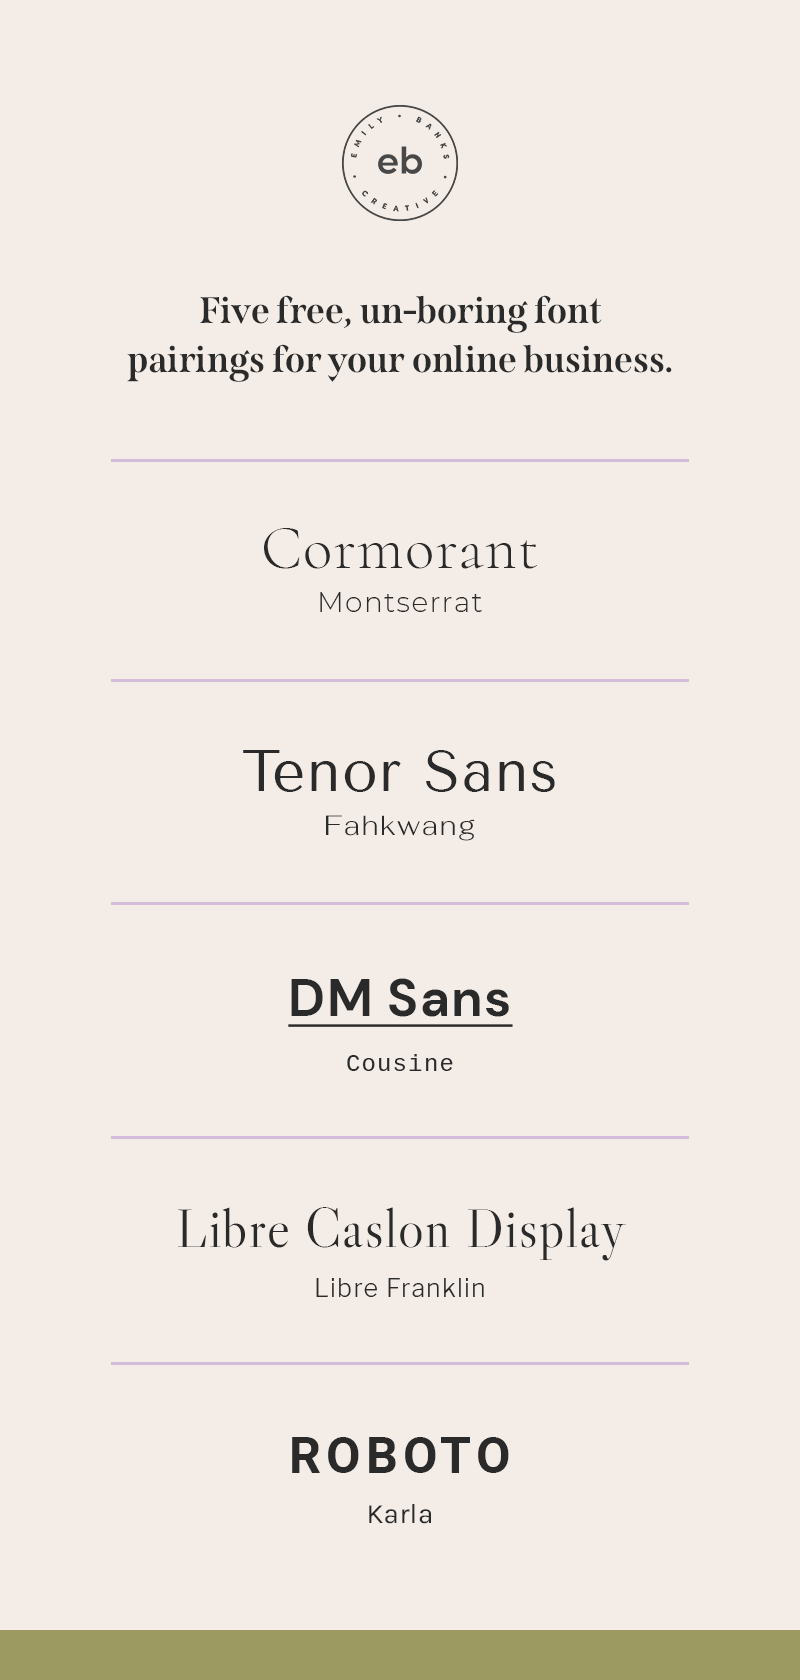 Done for you font pairings minus all the usual suspects to help keep your brand unique.